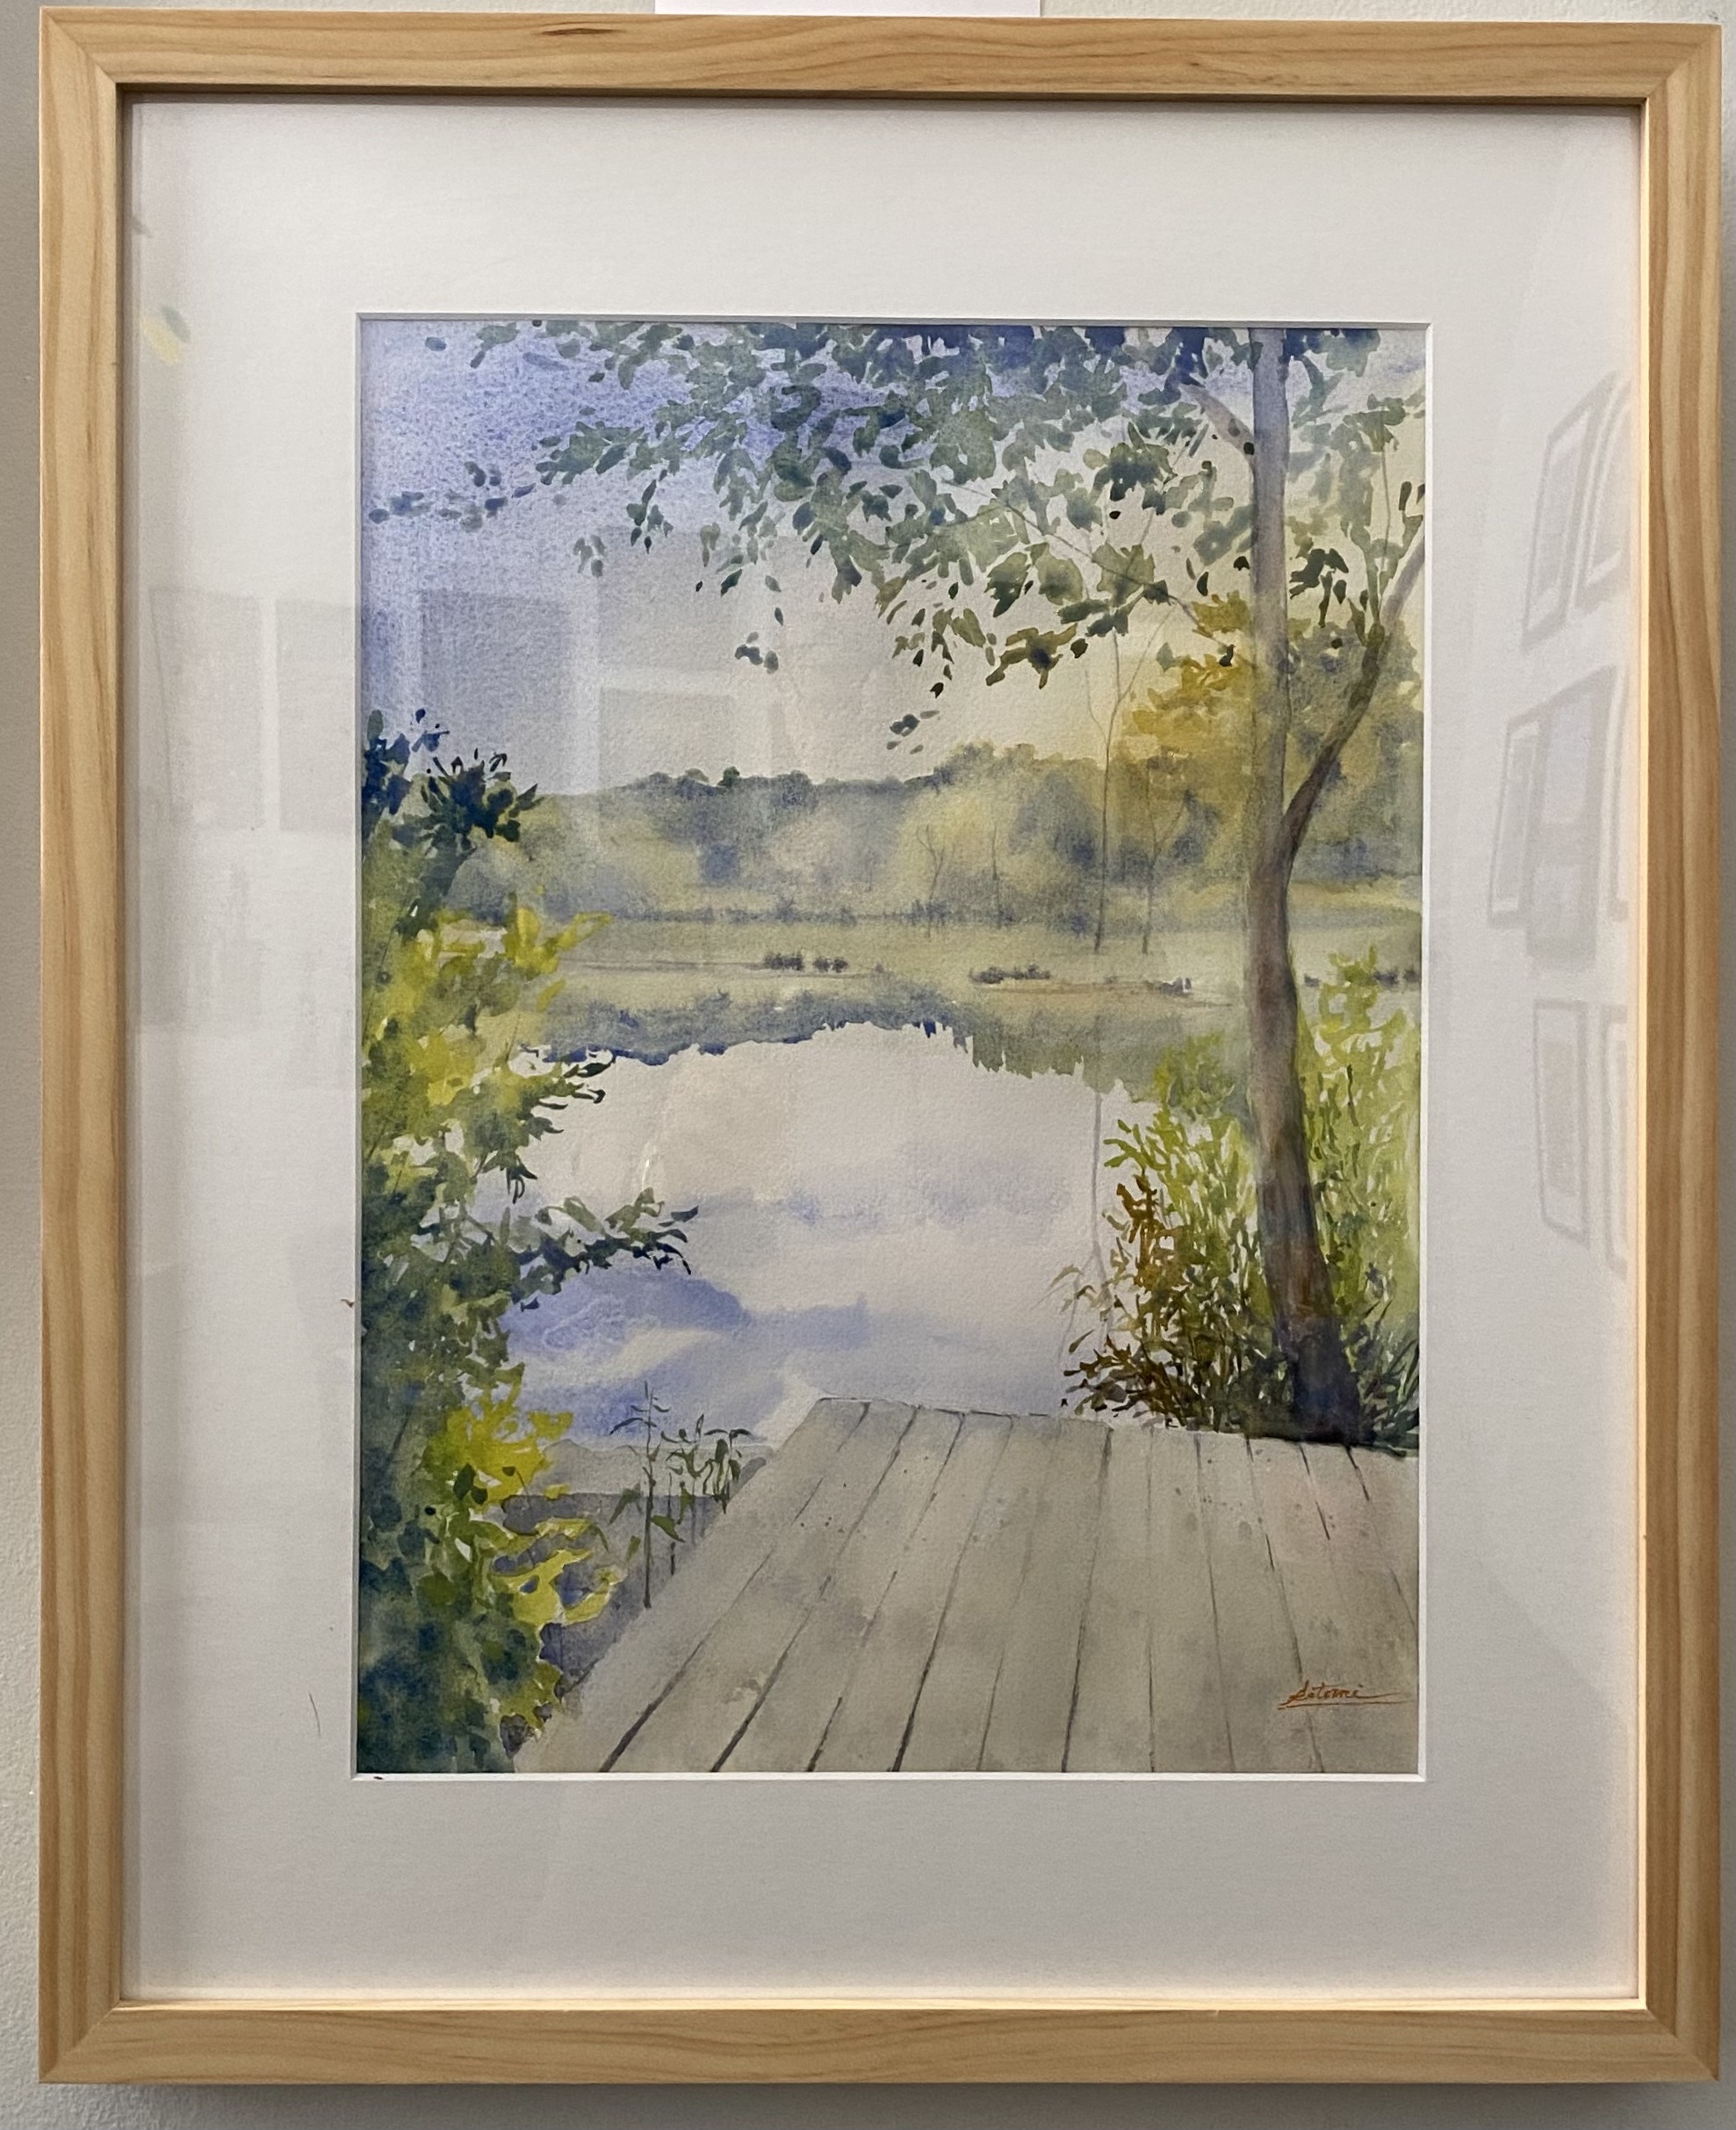 Pier at the Pond
Watercolor
11" X 15"
$275.